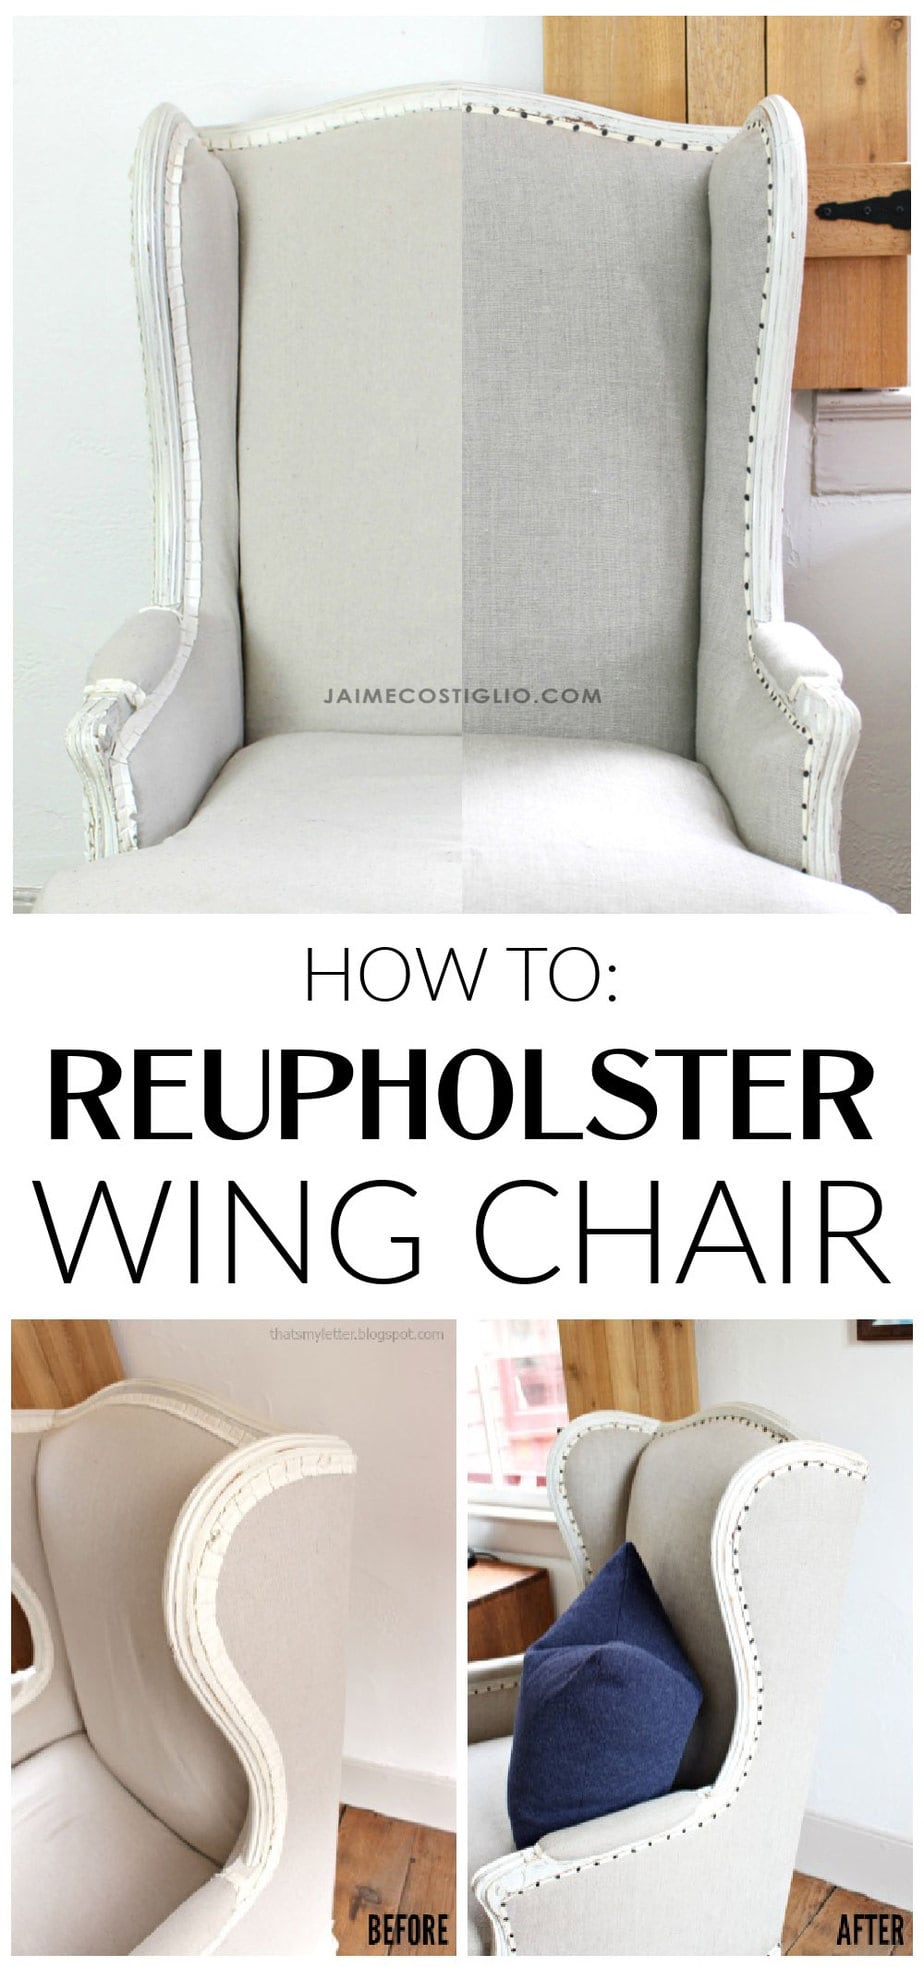 how to reupholster a wing chair